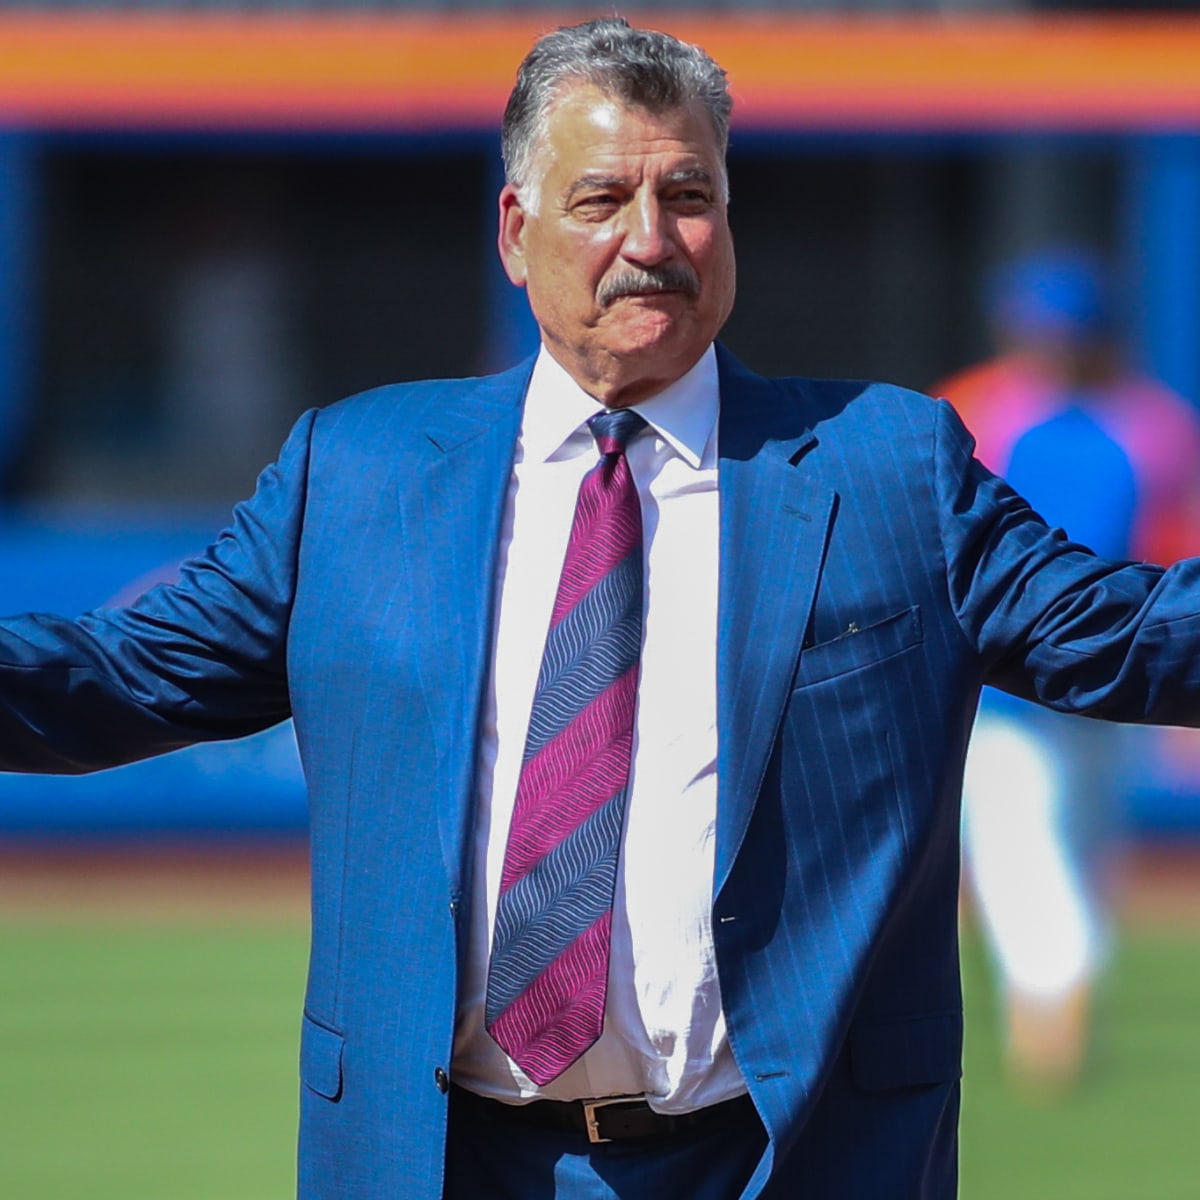 Boomer Esiason: Deal Between Keith Hernandez & SNY To Be Announced This  Week